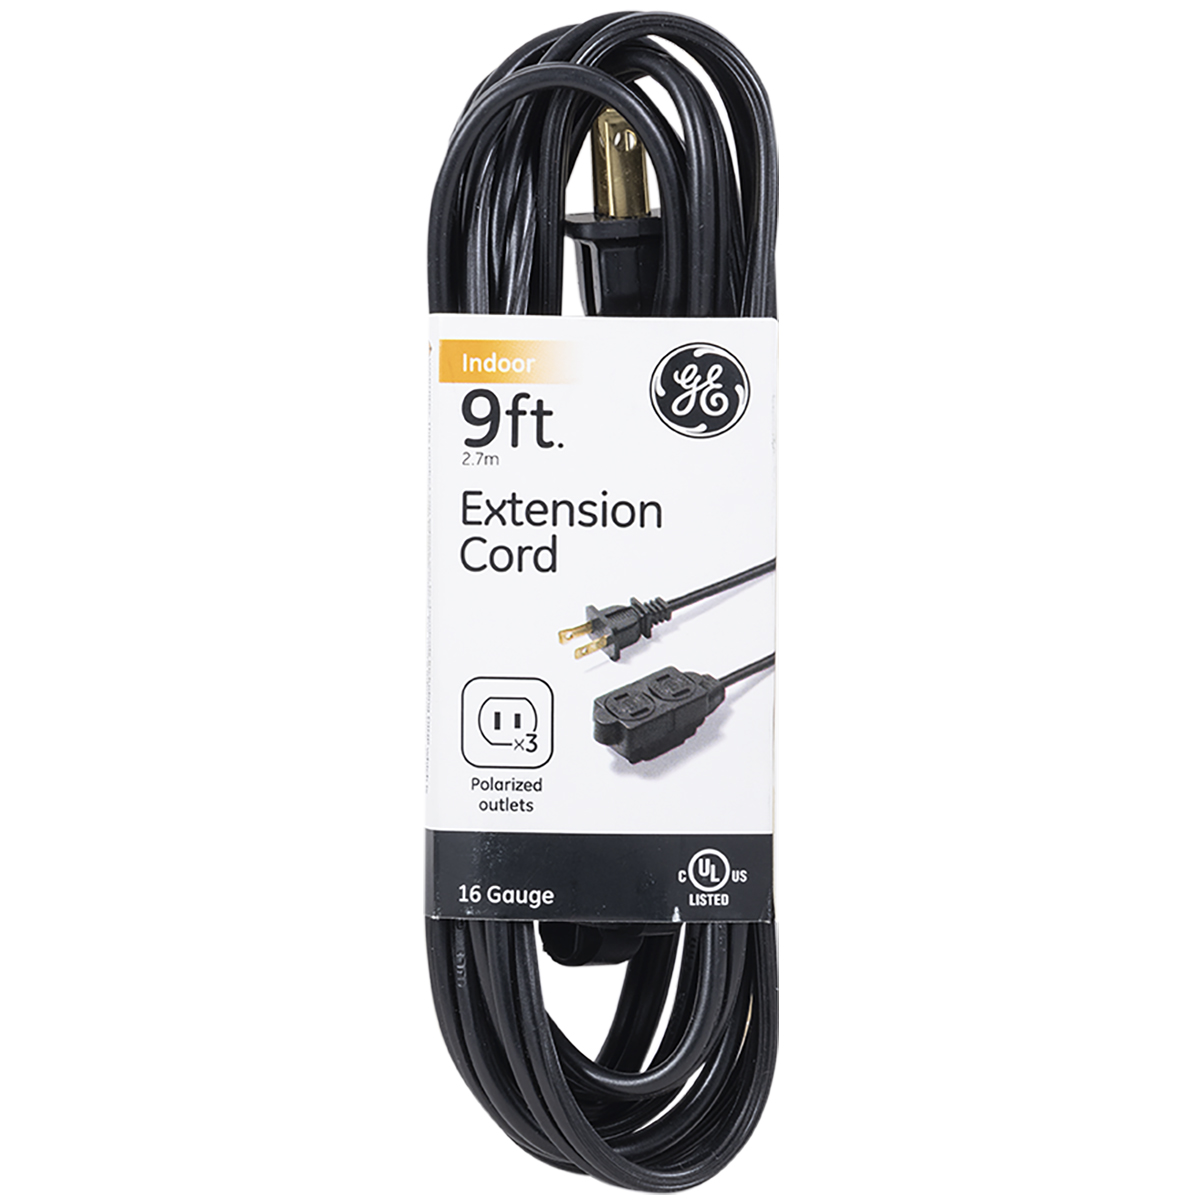 3 Outlet Black Polarized Extension Cord